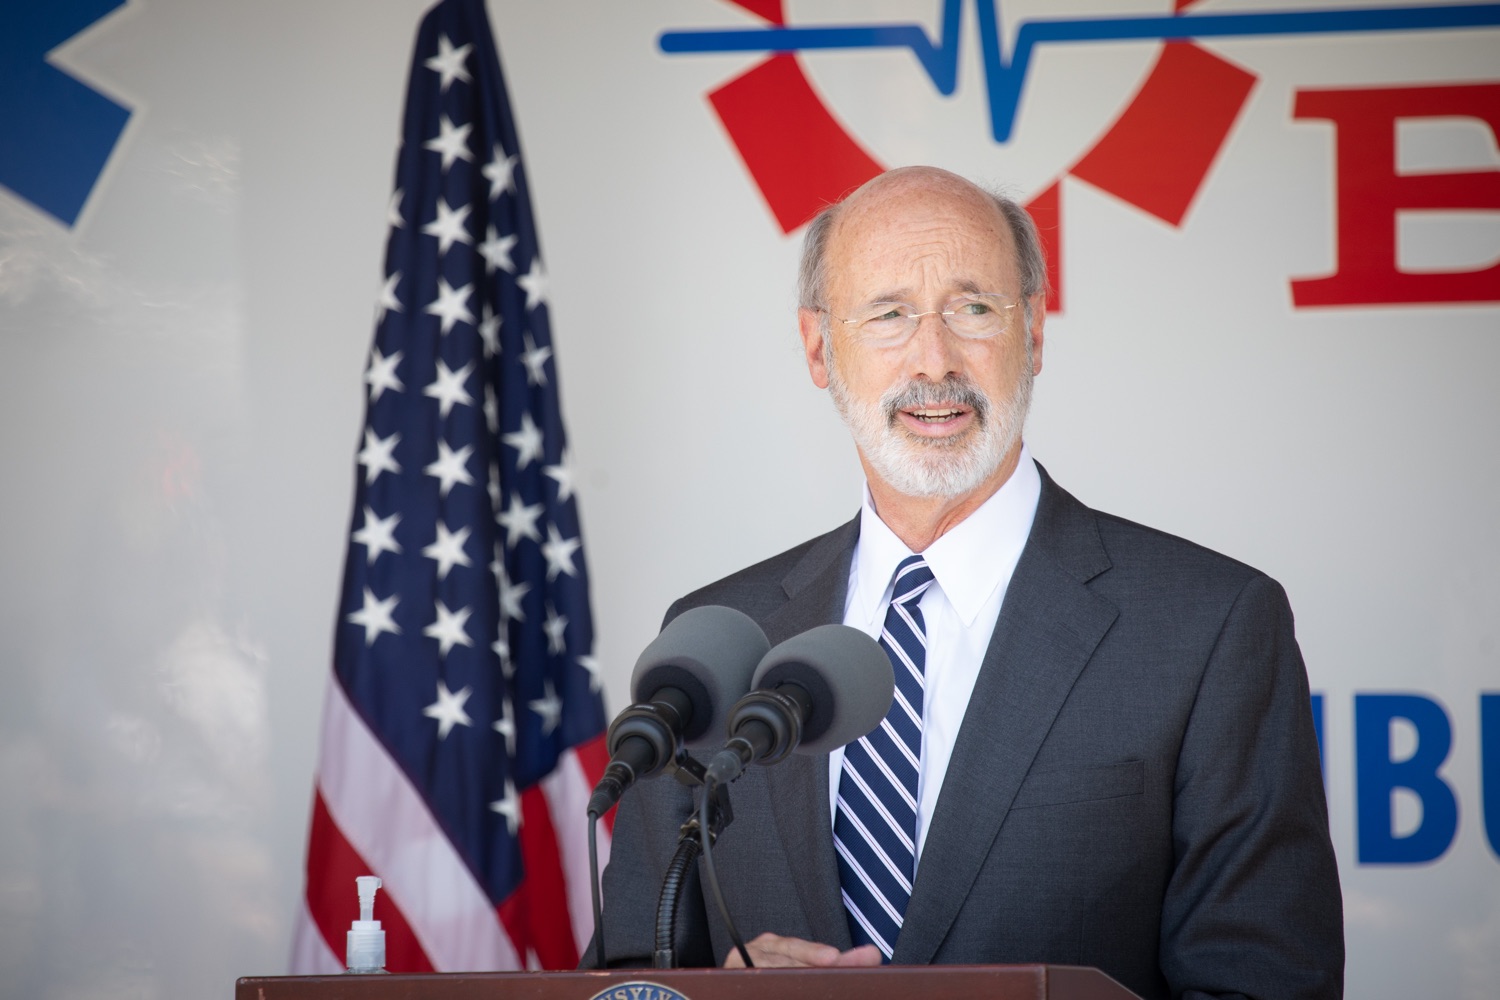 Pennsylvania Governor Tom Wolf speaking with Lancaster EMS employees and their families. Governor Tom Wolf visited the Millersville location of Lancaster EMS today to thank first responders and learn about how they are adapting their critical work during the states response to the COVID-19 pandemic.  Millersville, PA  July 30, 2020<br><a href="https://filesource.amperwave.net/commonwealthofpa/photo/18180_gov_first_responders_dz_002.jpg" target="_blank">⇣ Download Photo</a>